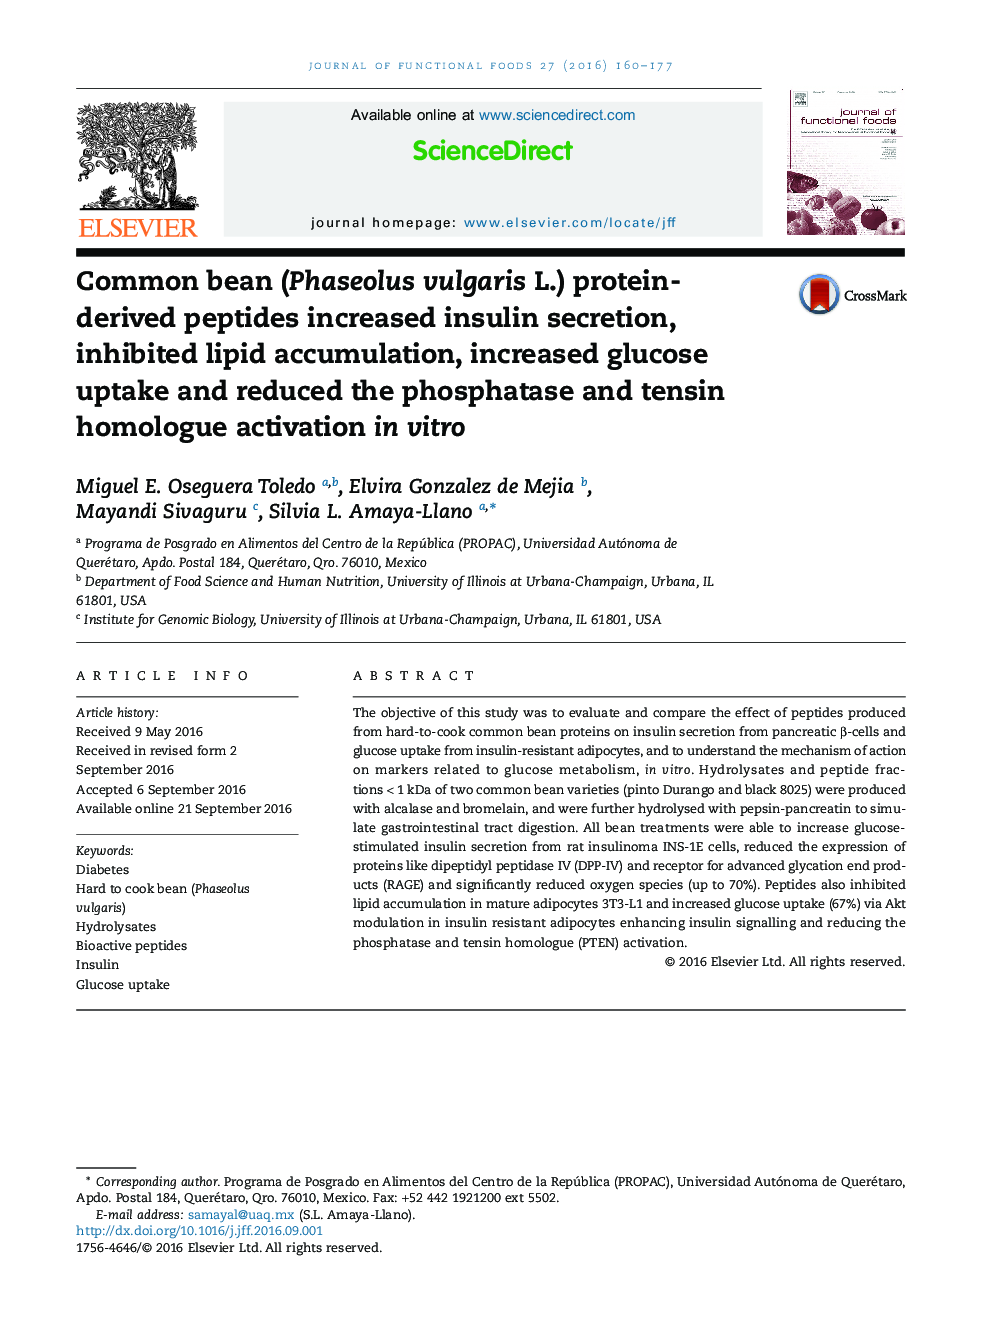 Common bean (Phaseolus vulgaris L.) protein-derived peptides increased insulin secretion, inhibited lipid accumulation, increased glucose uptake and reduced the phosphatase and tensin homologue activation in vitro